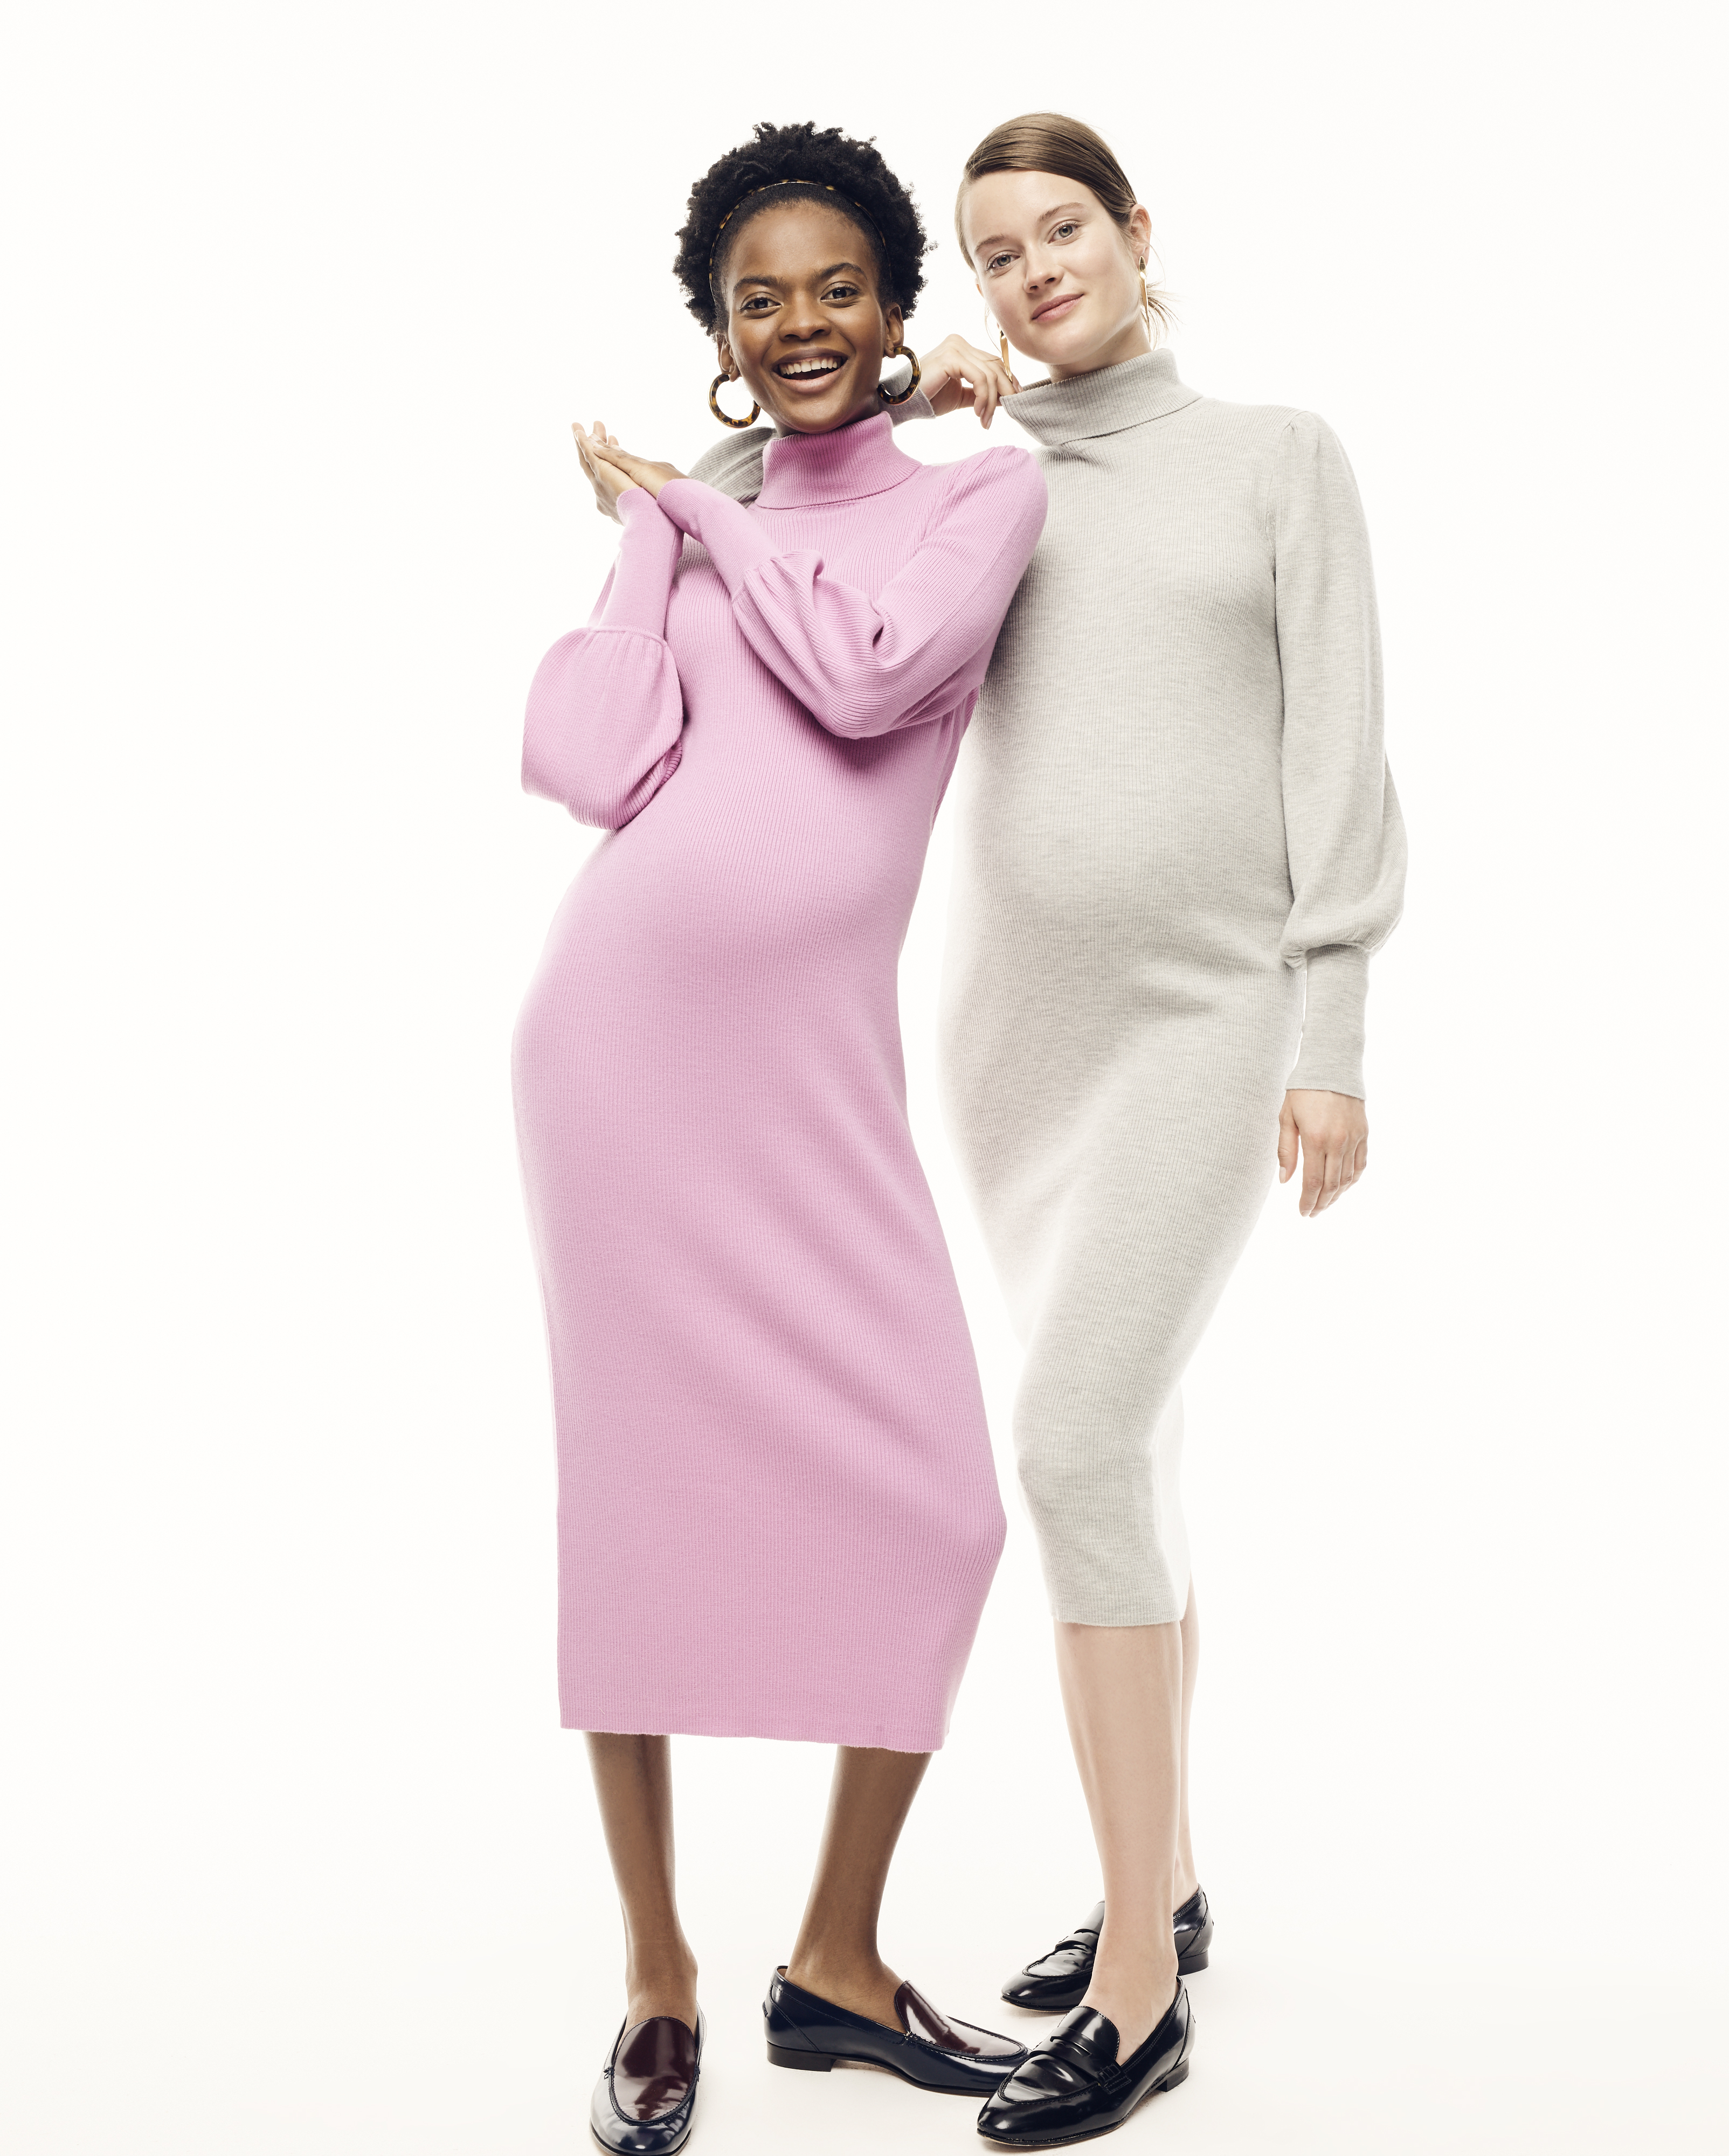 HATCH Collection x J.Crew: Changing the Maternity Clothes Game